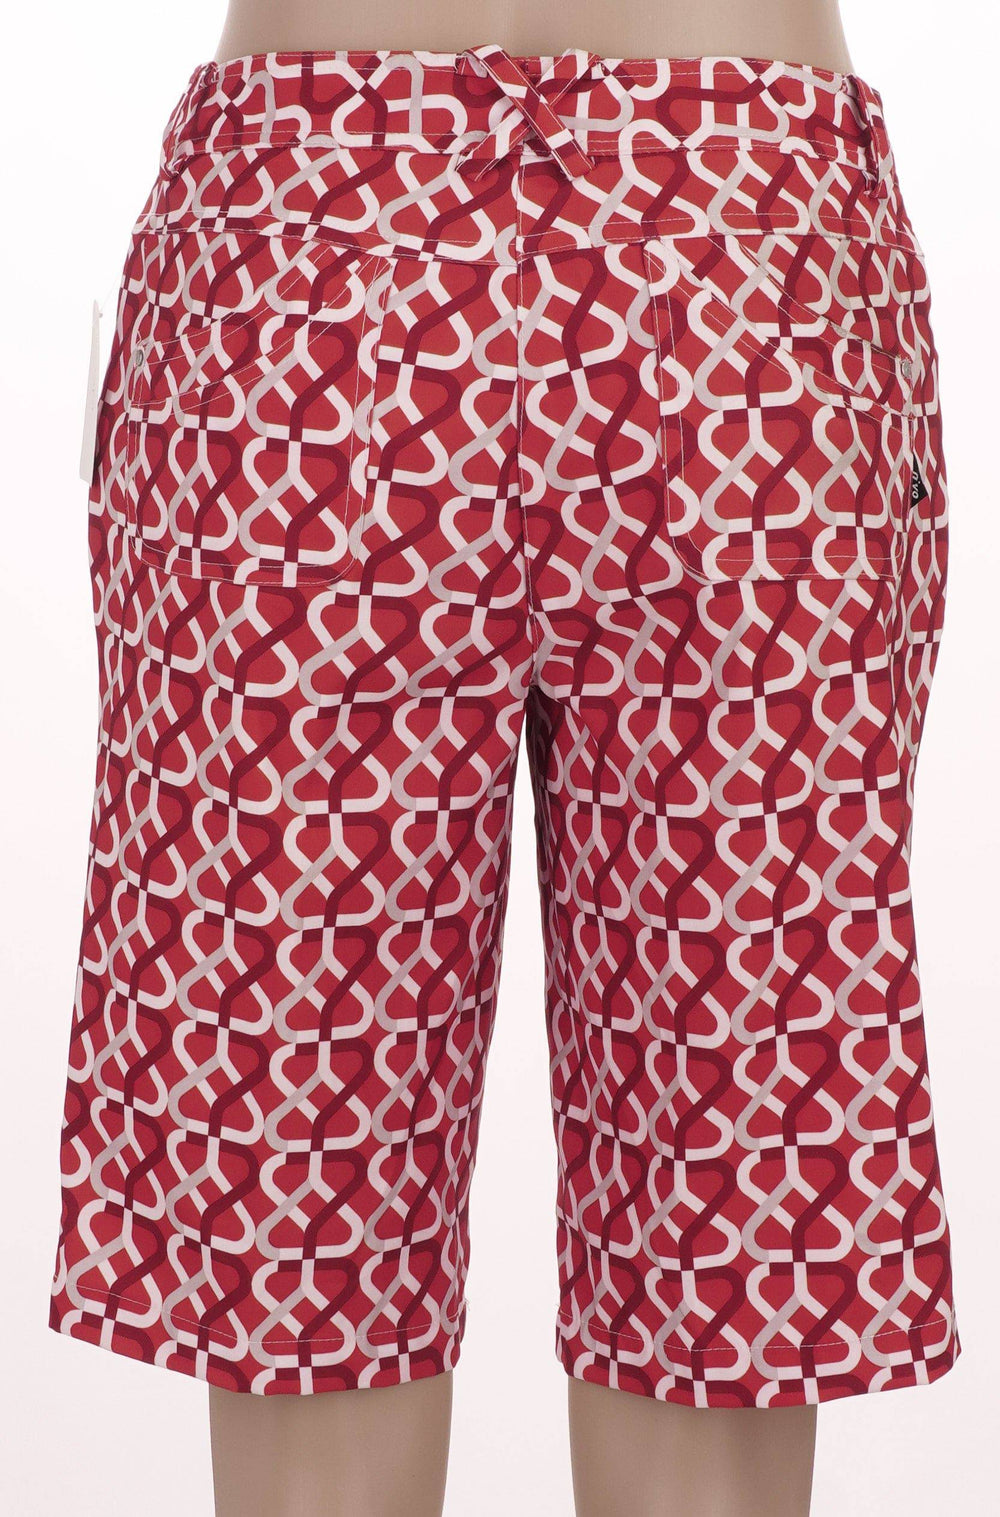 Nivo 2 / Red / Consigned Nivo 20" Printed Golf Shorts - Red-White - Size 2